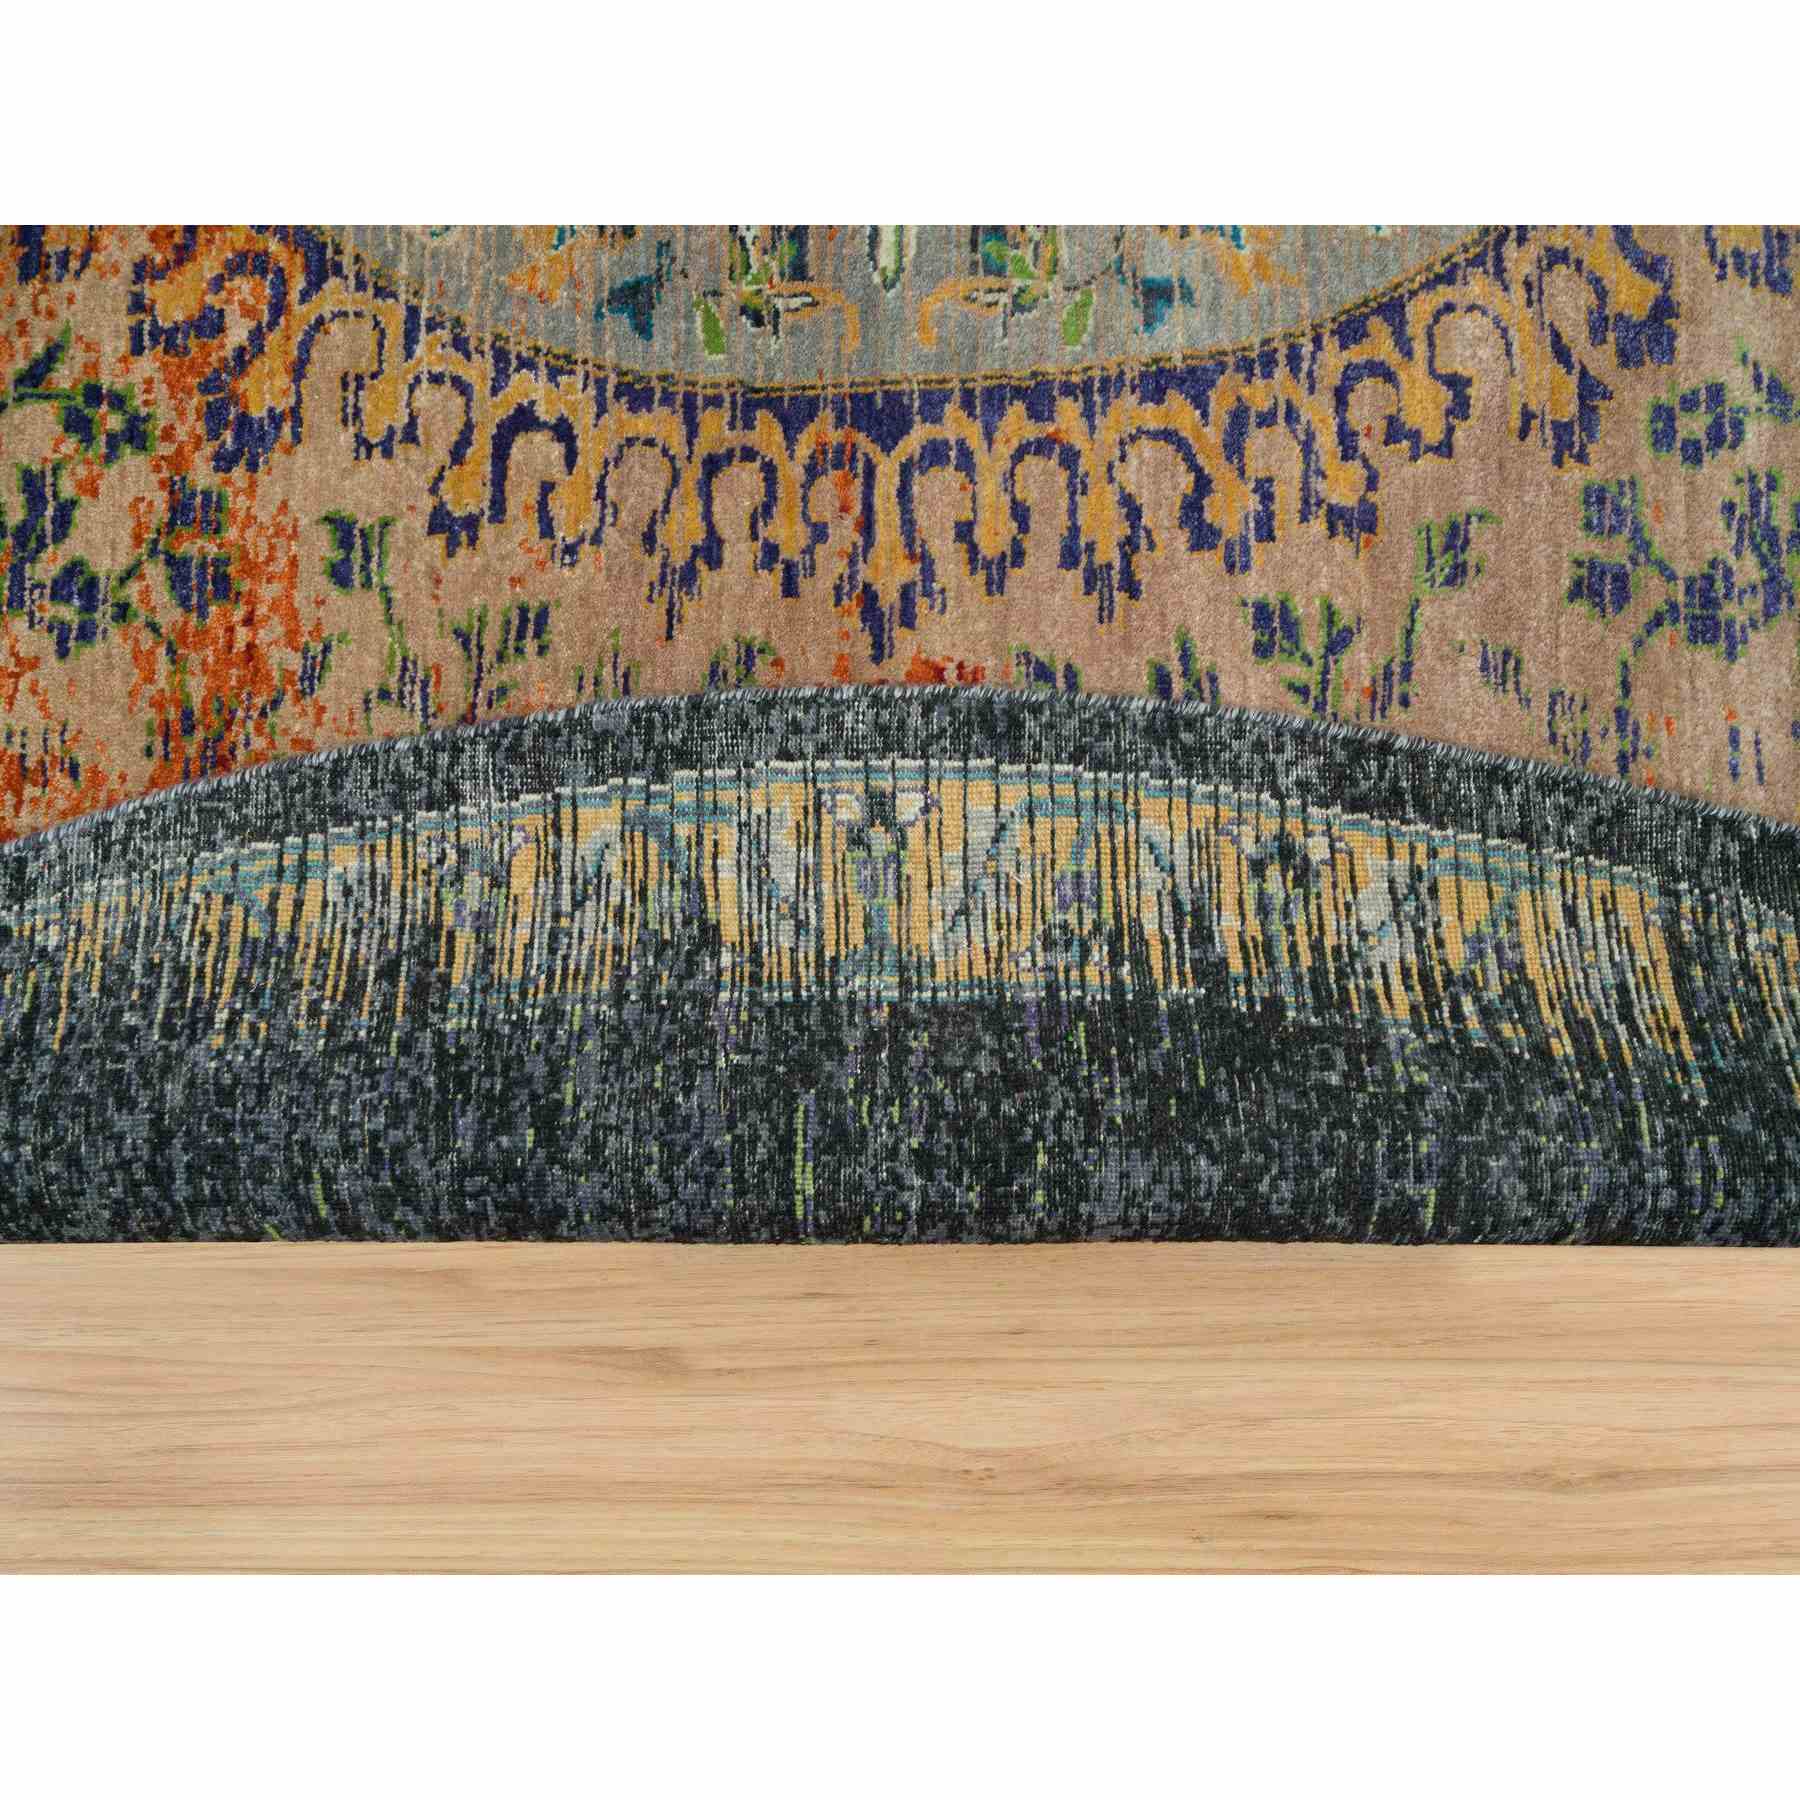 Transitional-Hand-Knotted-Rug-329500